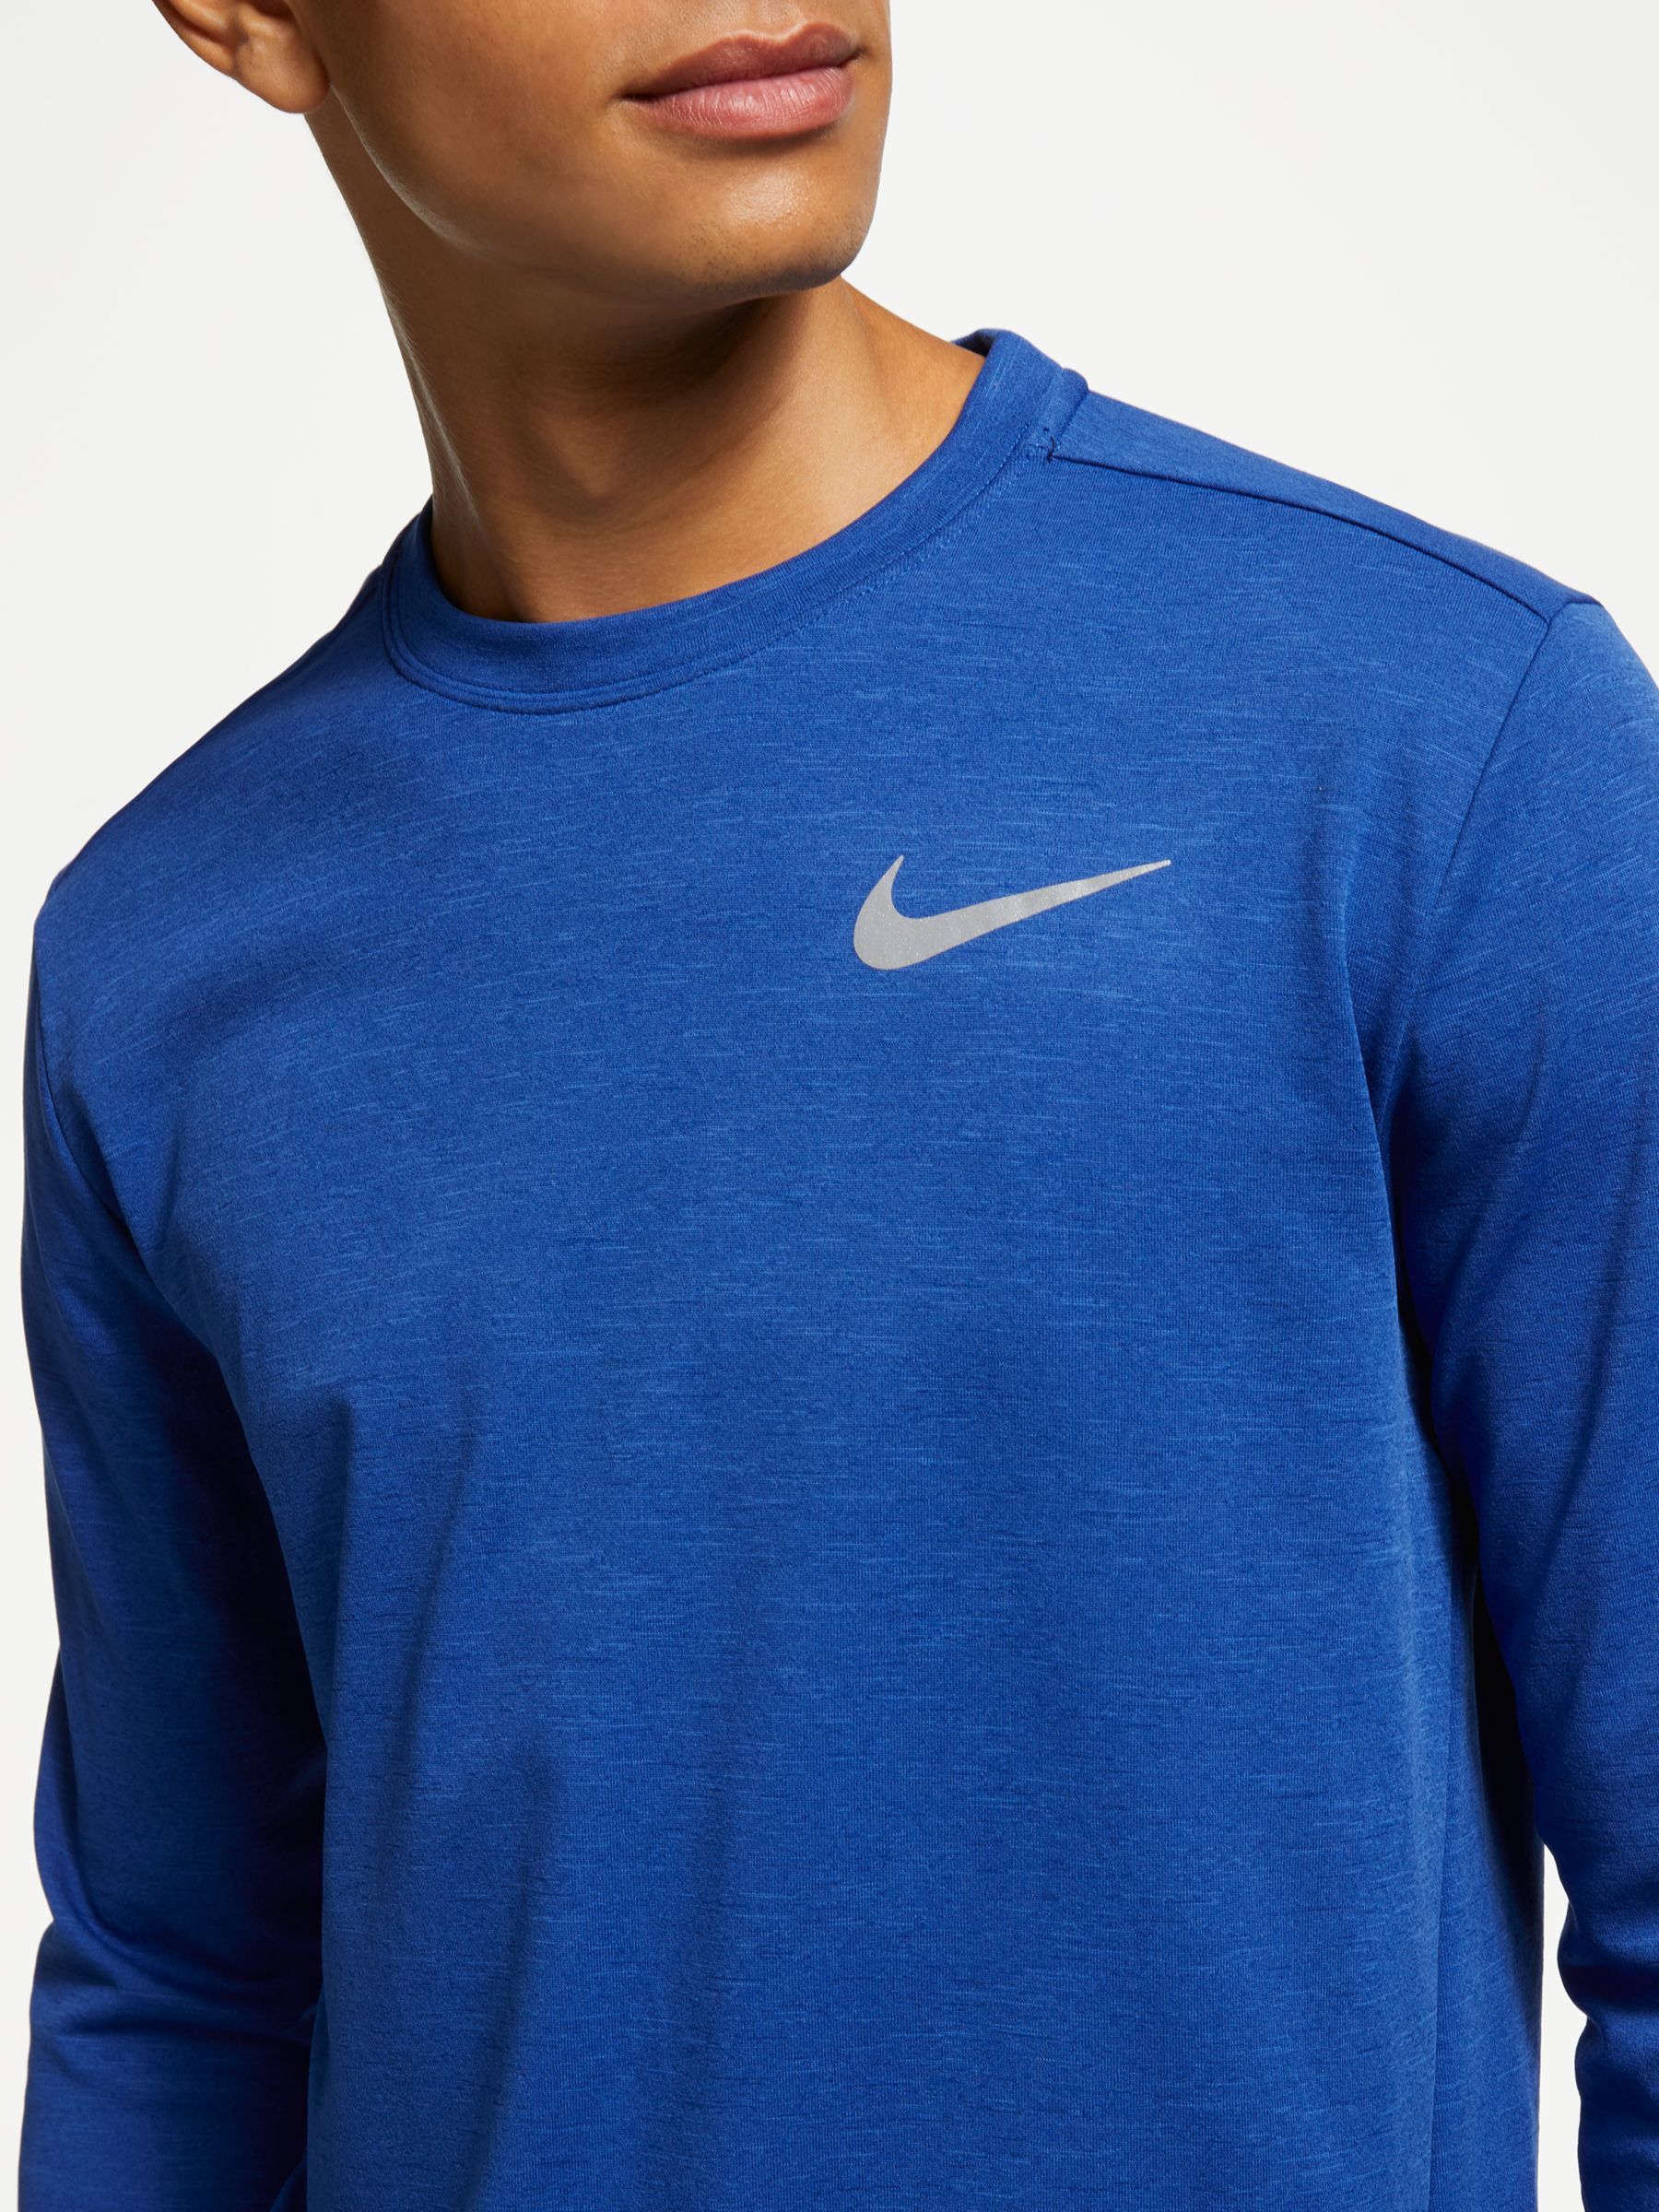 Nike Therma Element Long Running Top, Blue Void